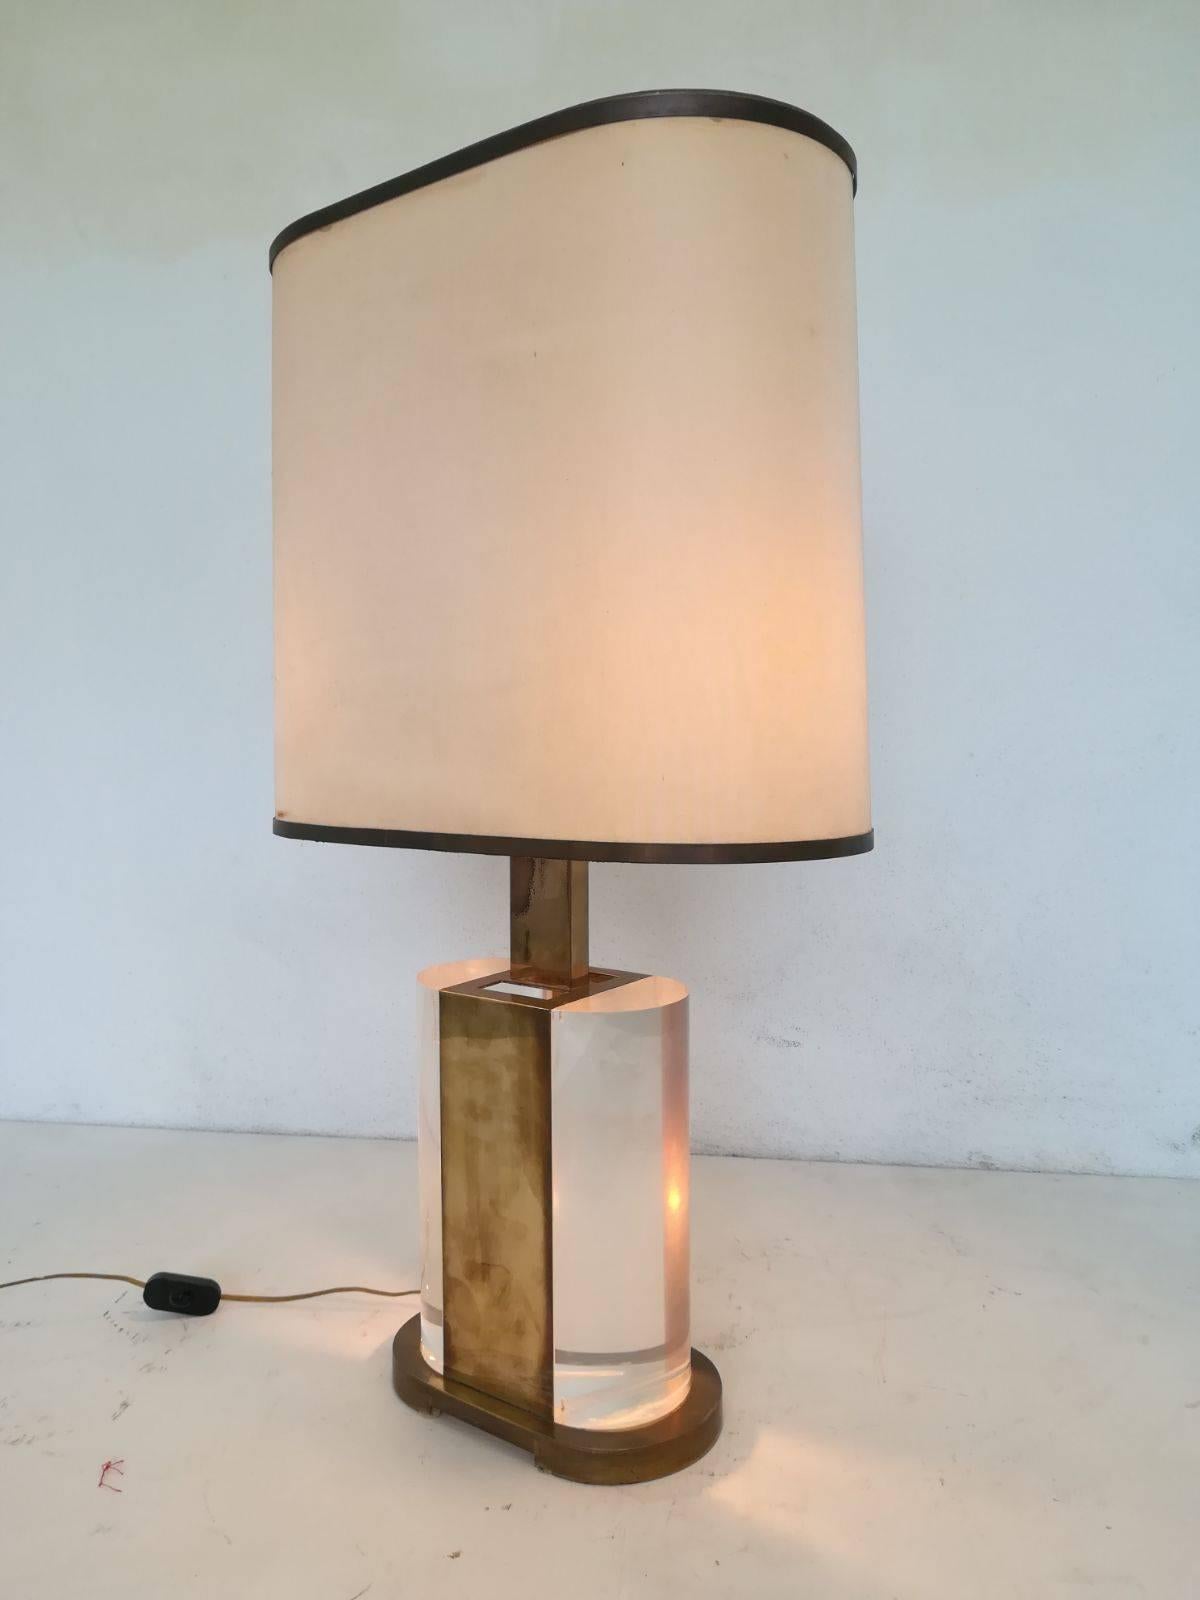 Rare brass and Lucite table lamp signed Gabriella Crespi.
Original brass and silk shade.